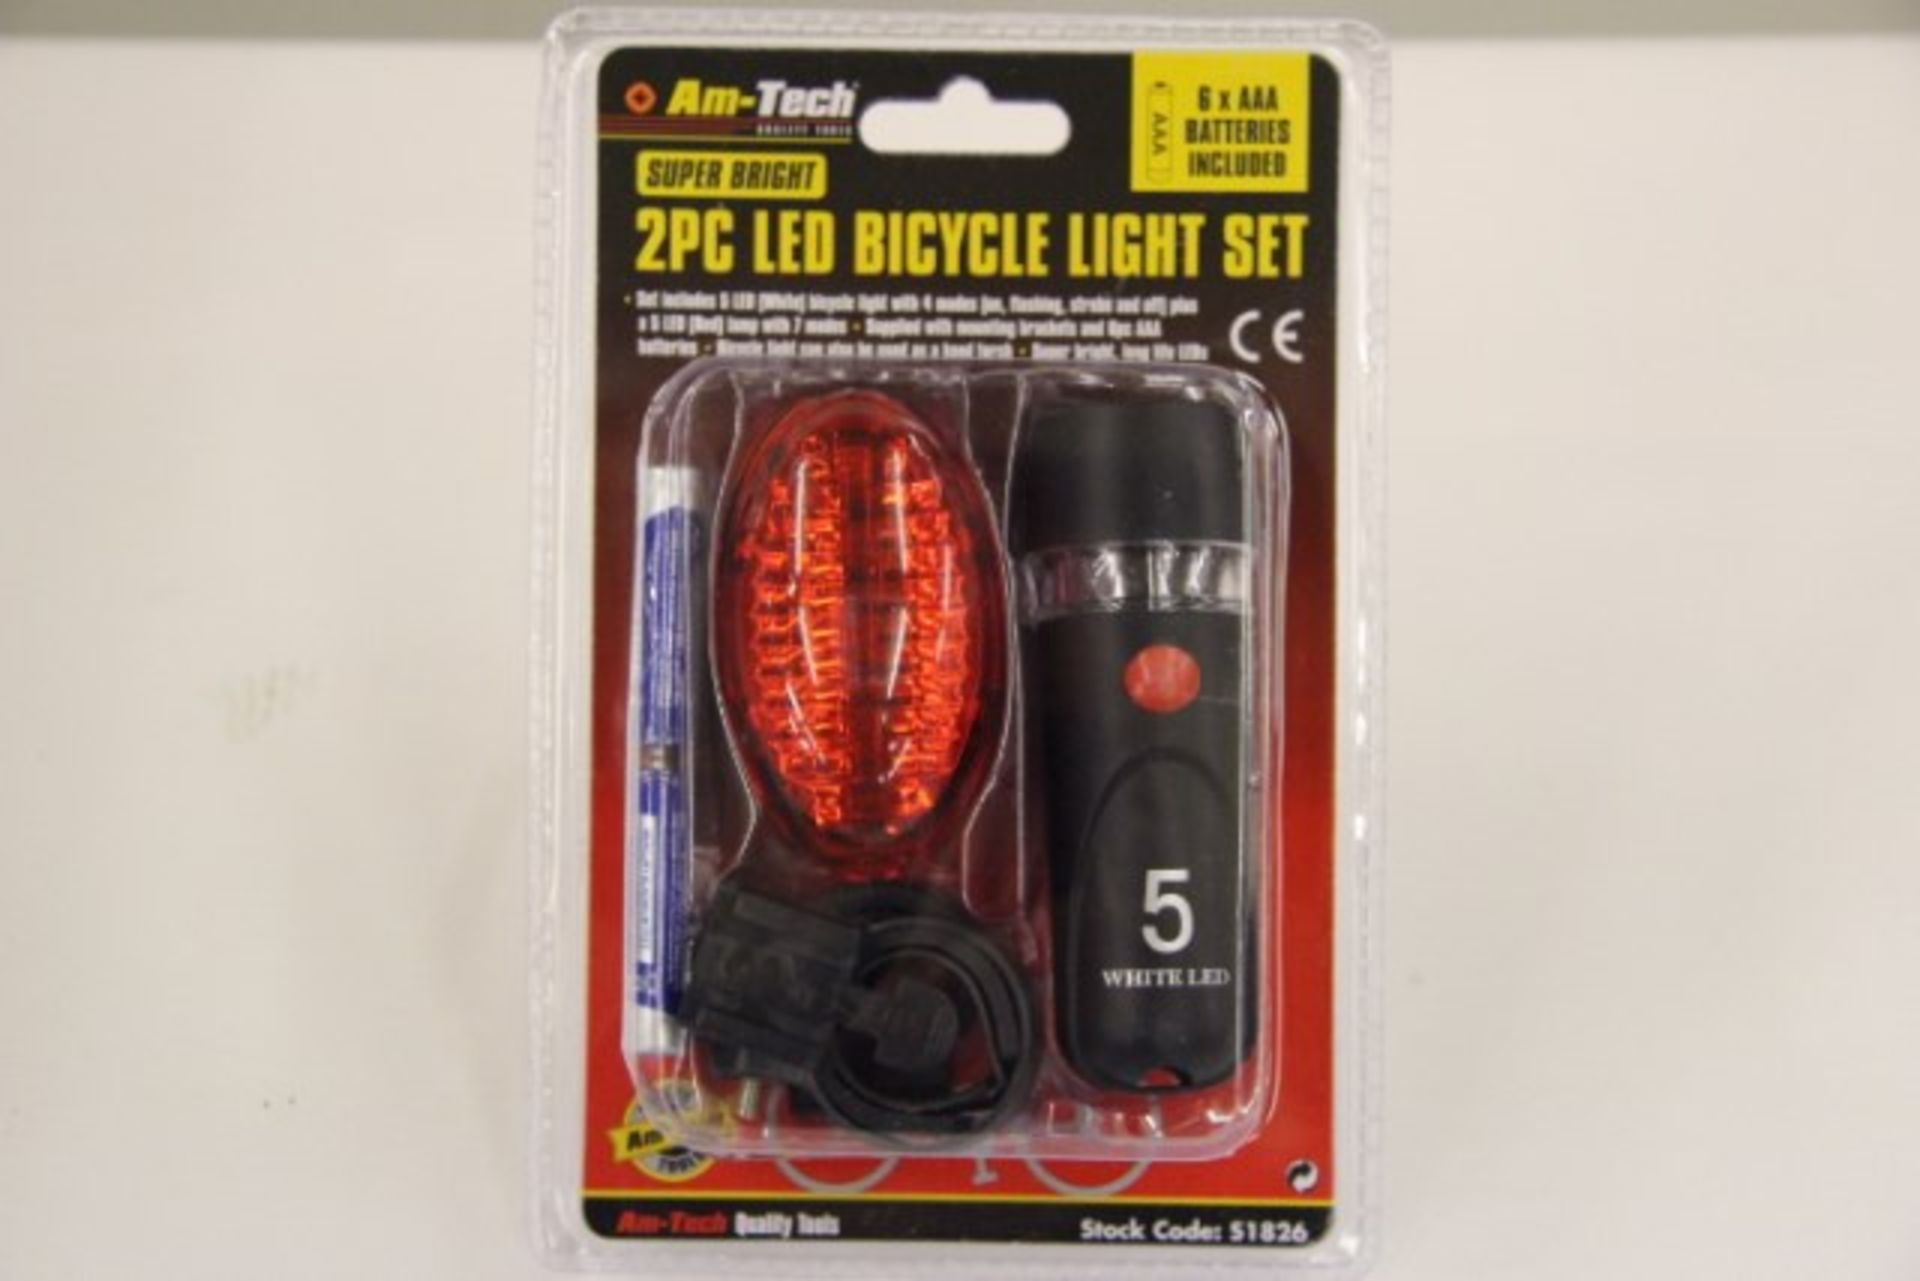 V *TRADE QTY* Brand New 2 Piece LED Bicycle Light Set With White Lamp With Flashing Mode And Red